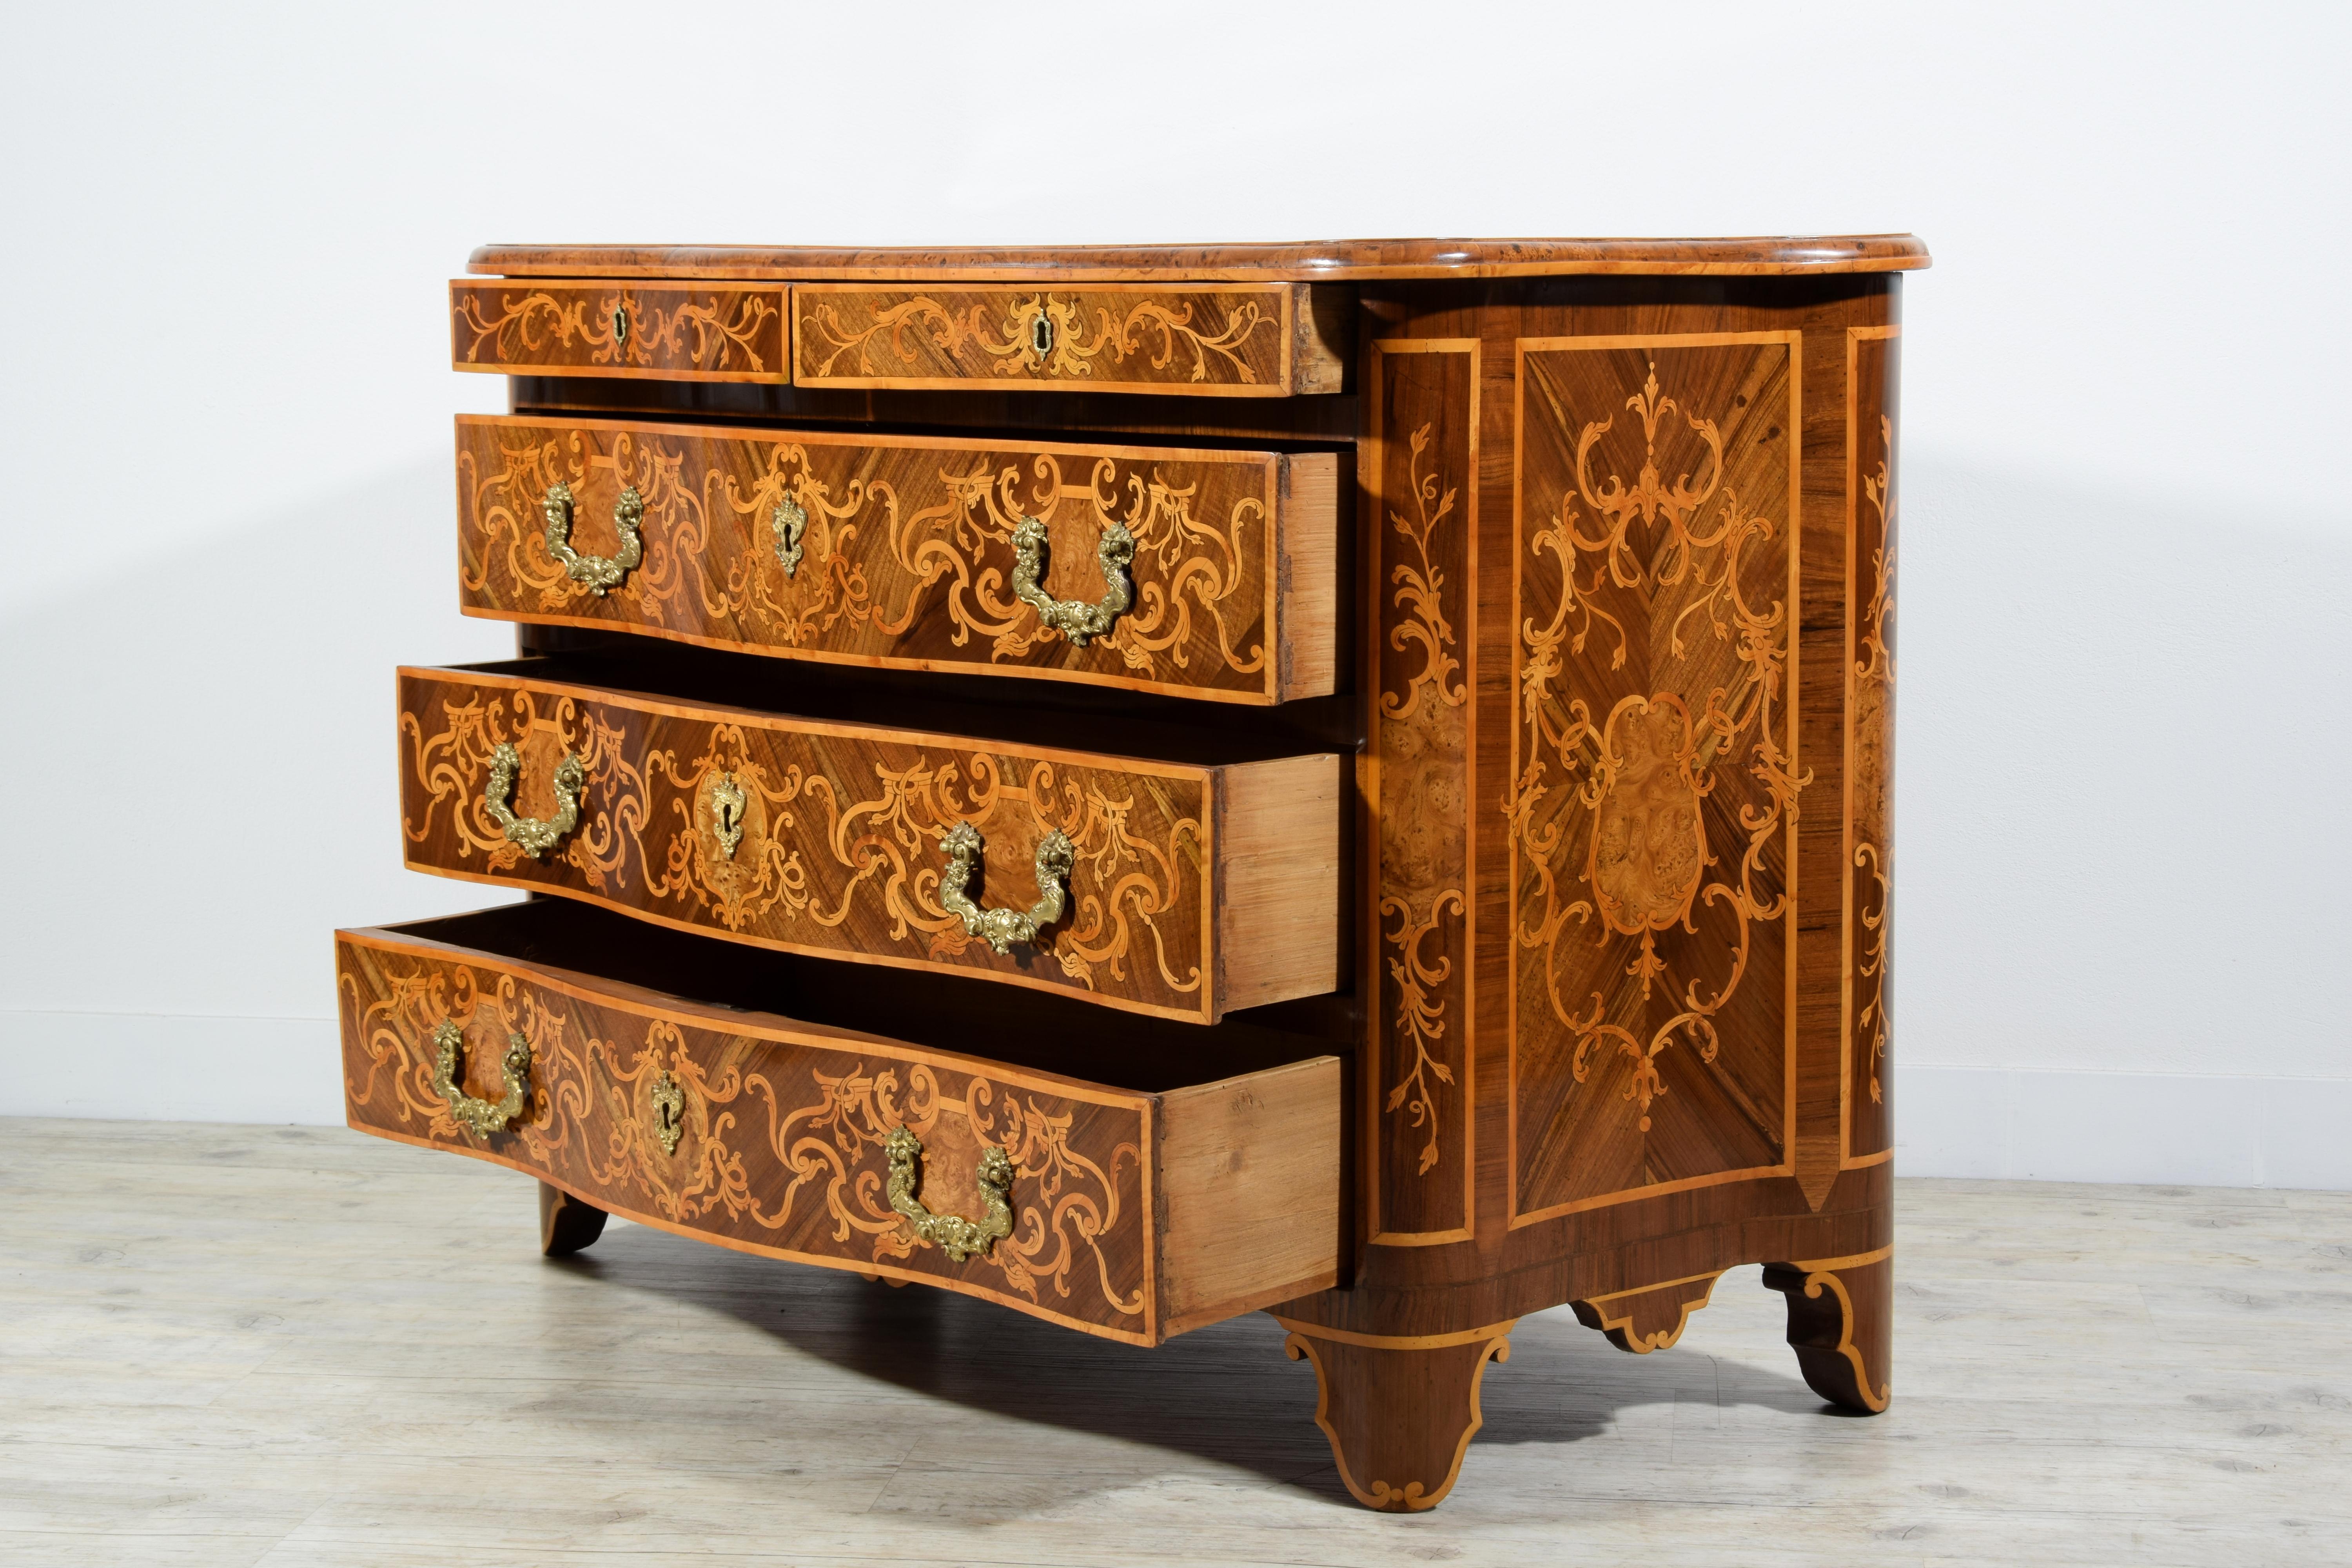 18th Century Italian Paved and Inlaid Wood Chest of Drawers 6